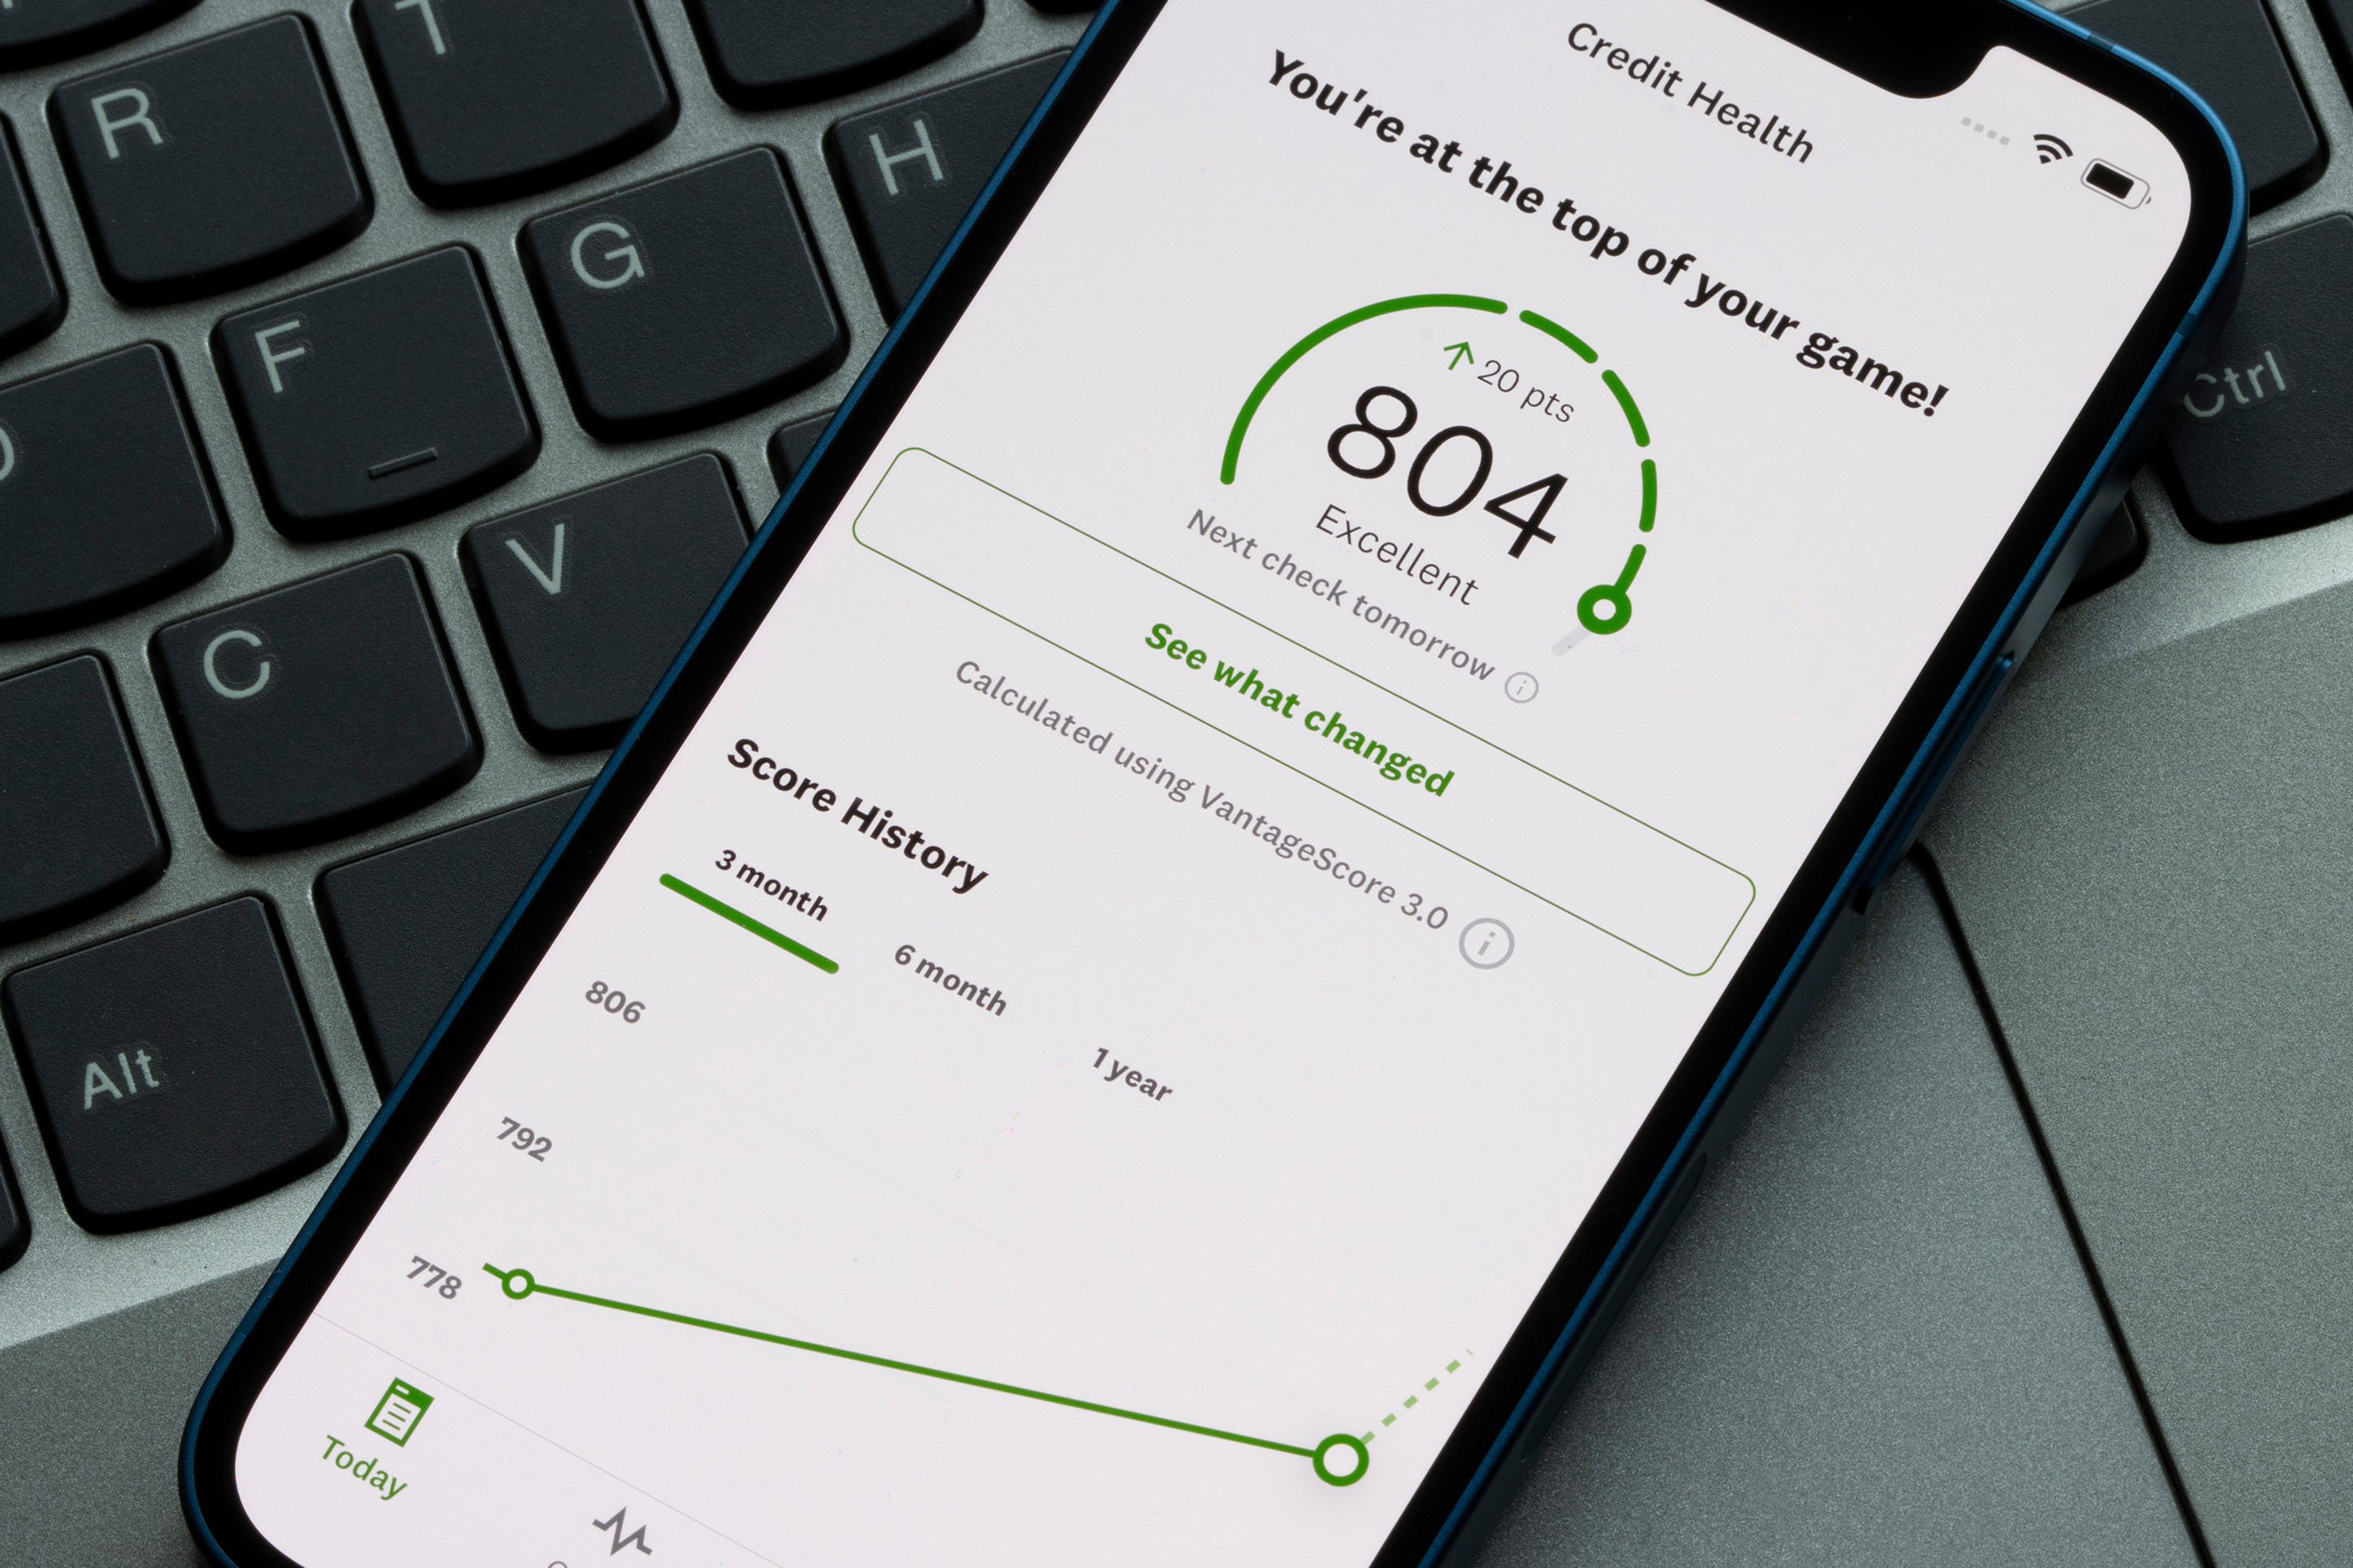 Credit score on a mobile phone